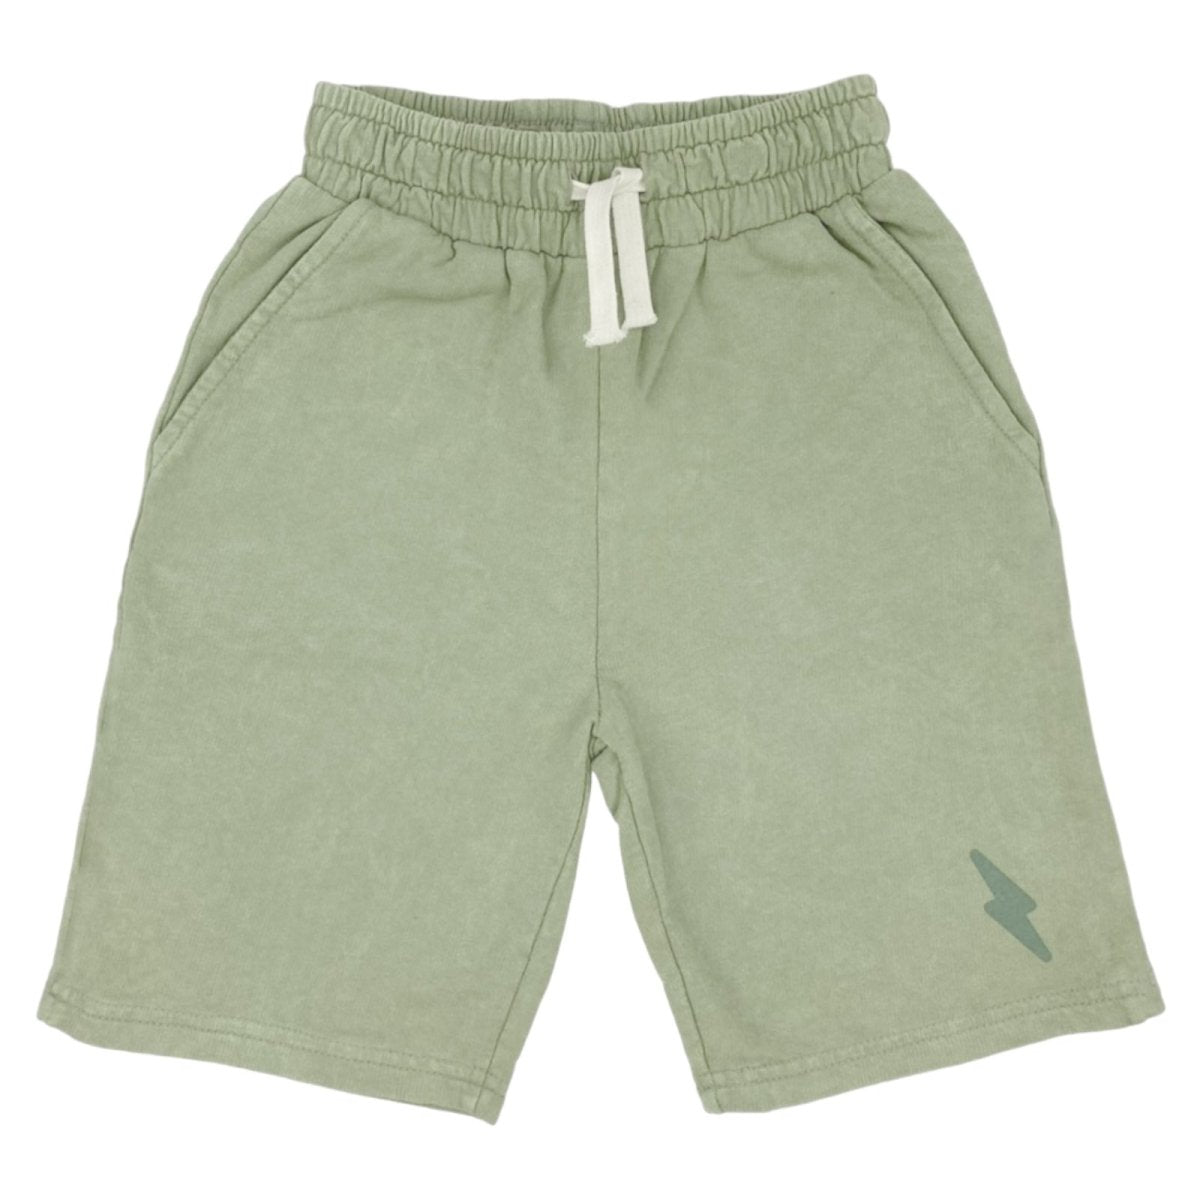 PINE SHORTS (PREORDERS) - TINY WHALES